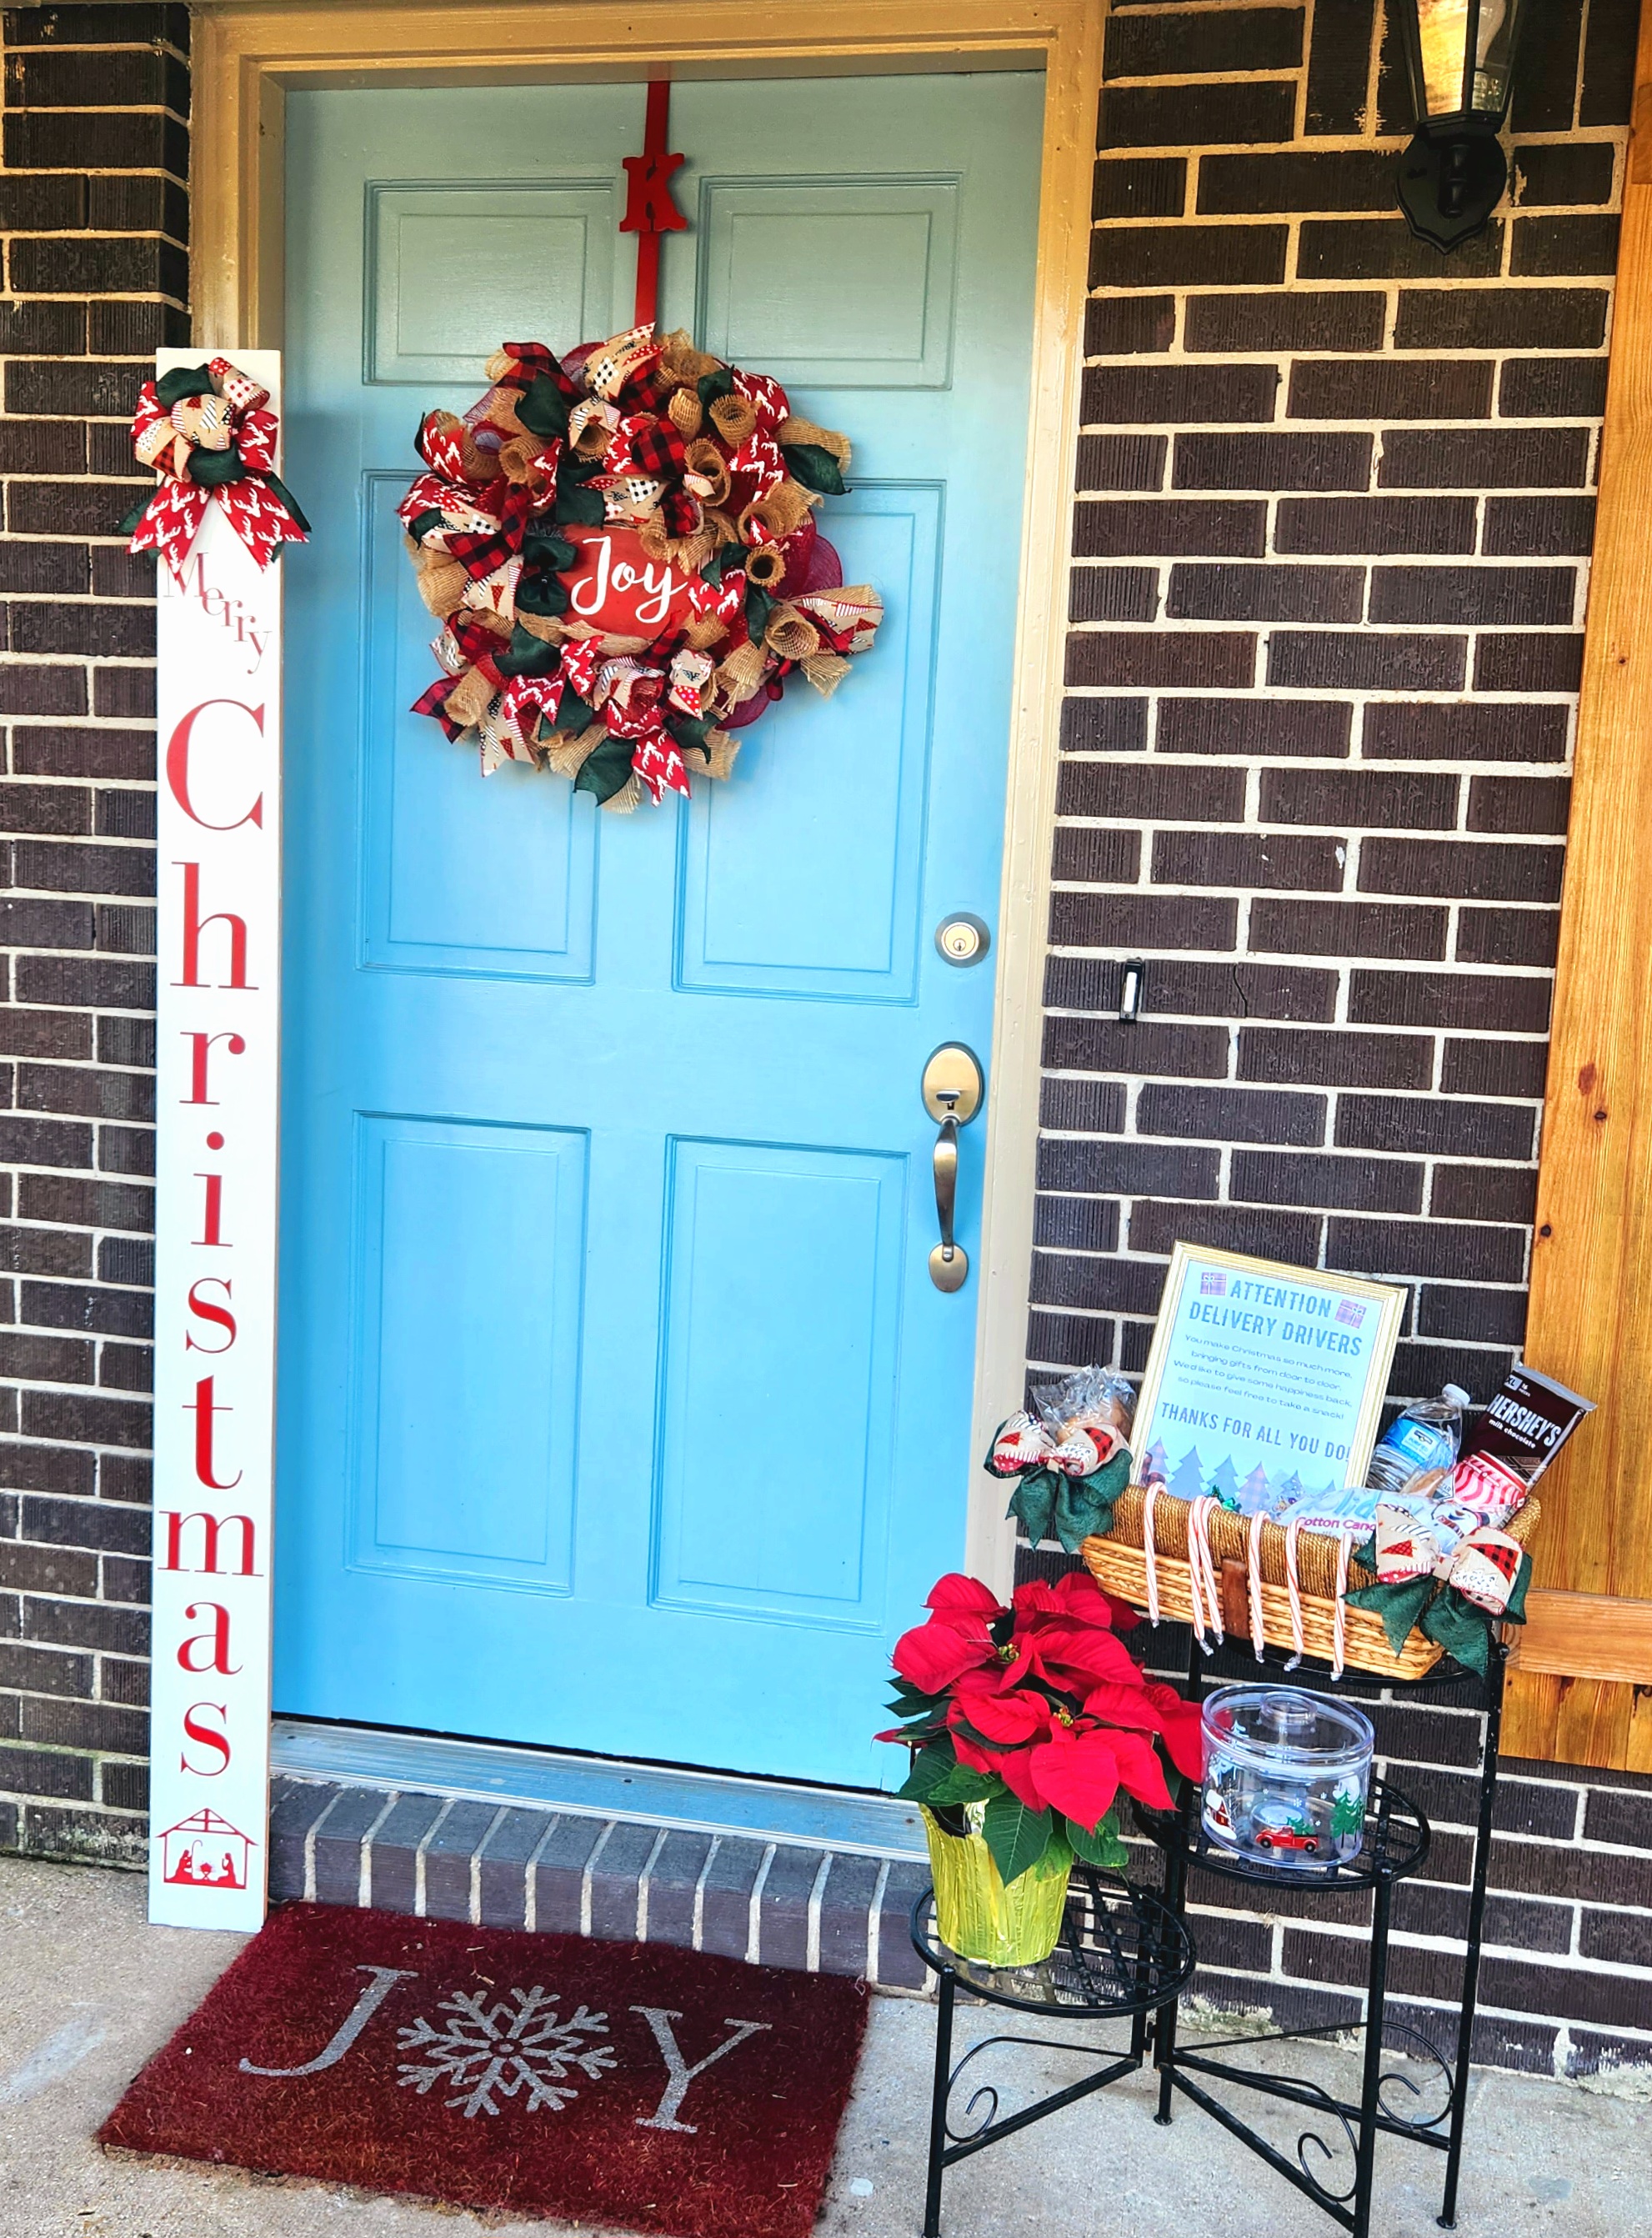 Our Christmas decorated porch with a "Joy" wreath on the door, a "Merry Christmas" porch leaner next to it, and a Christmas delivery driver printable sitting inside a basket filled with drinks, candy, and other snacks. The basket is on a plant shelf with a poinsettia on the lower shelf.